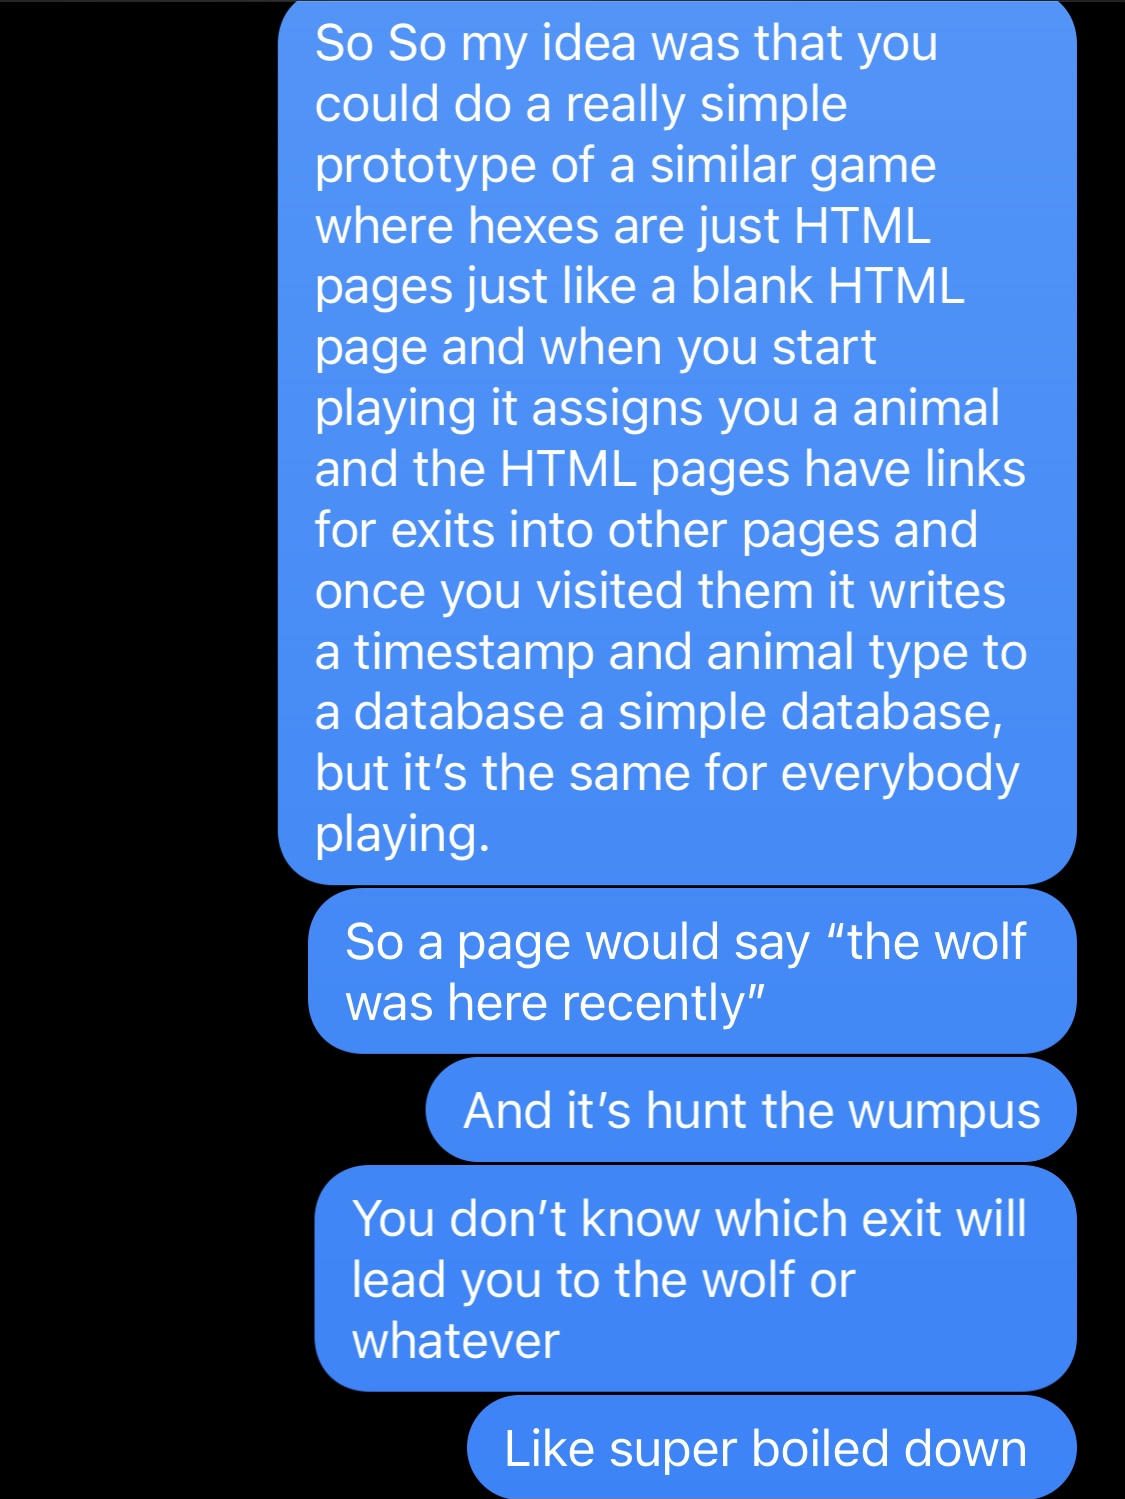 a text to james curry describing thicket as a simple html game